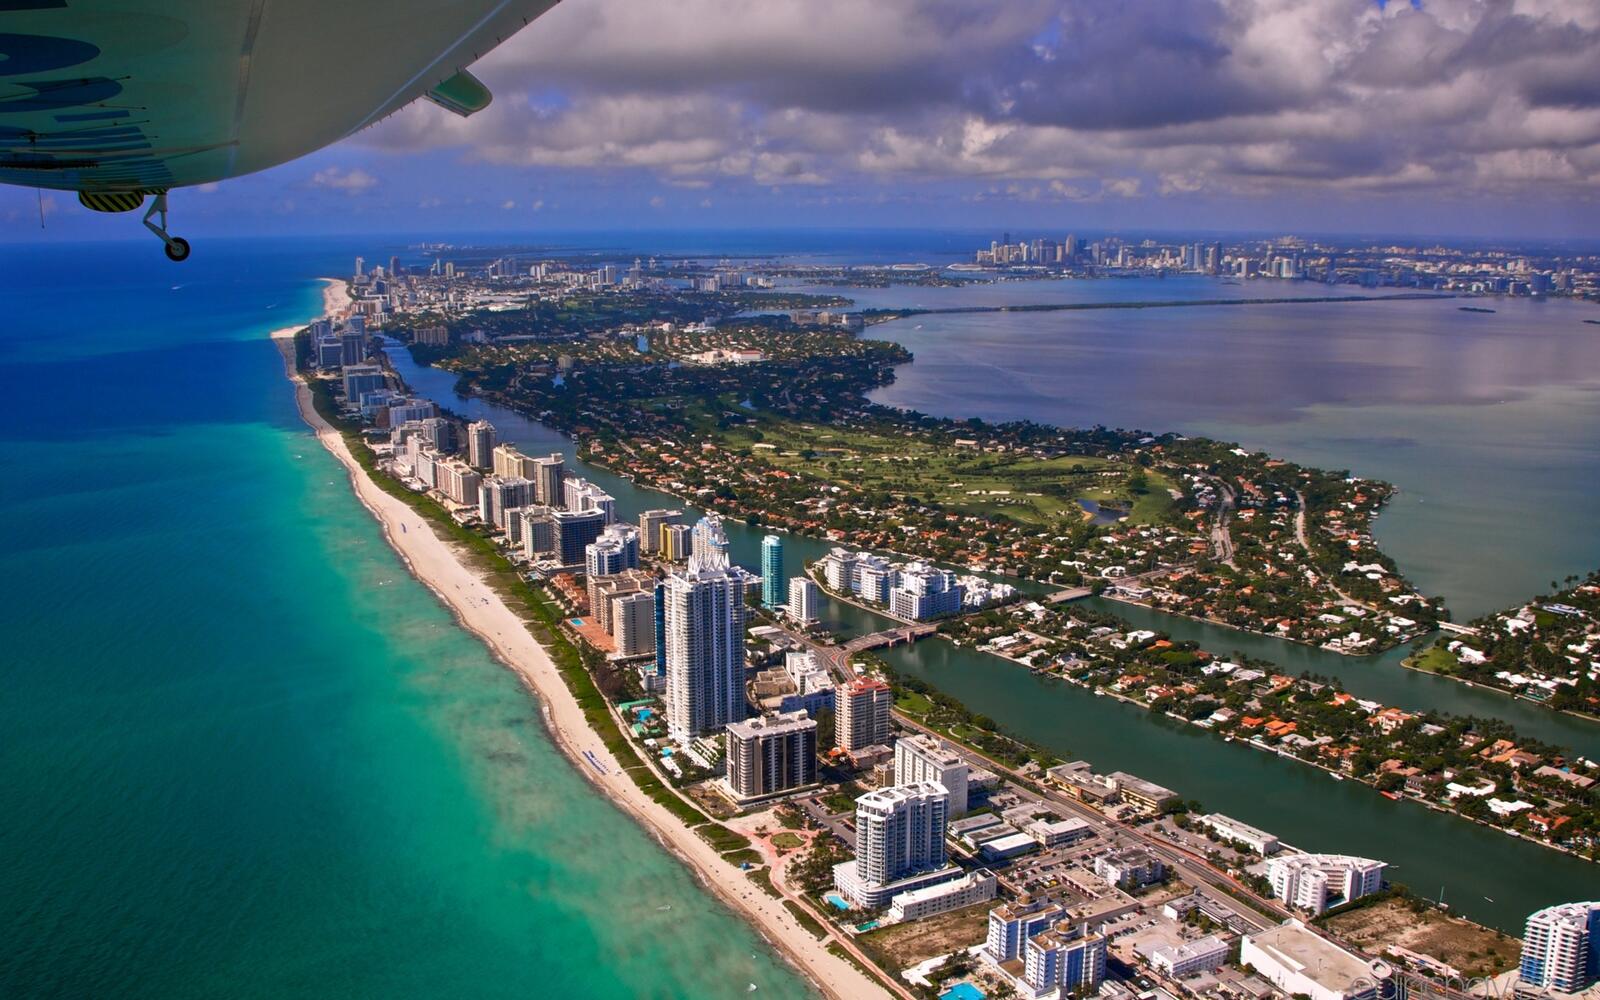 Free photo A view of Miami from an airplane